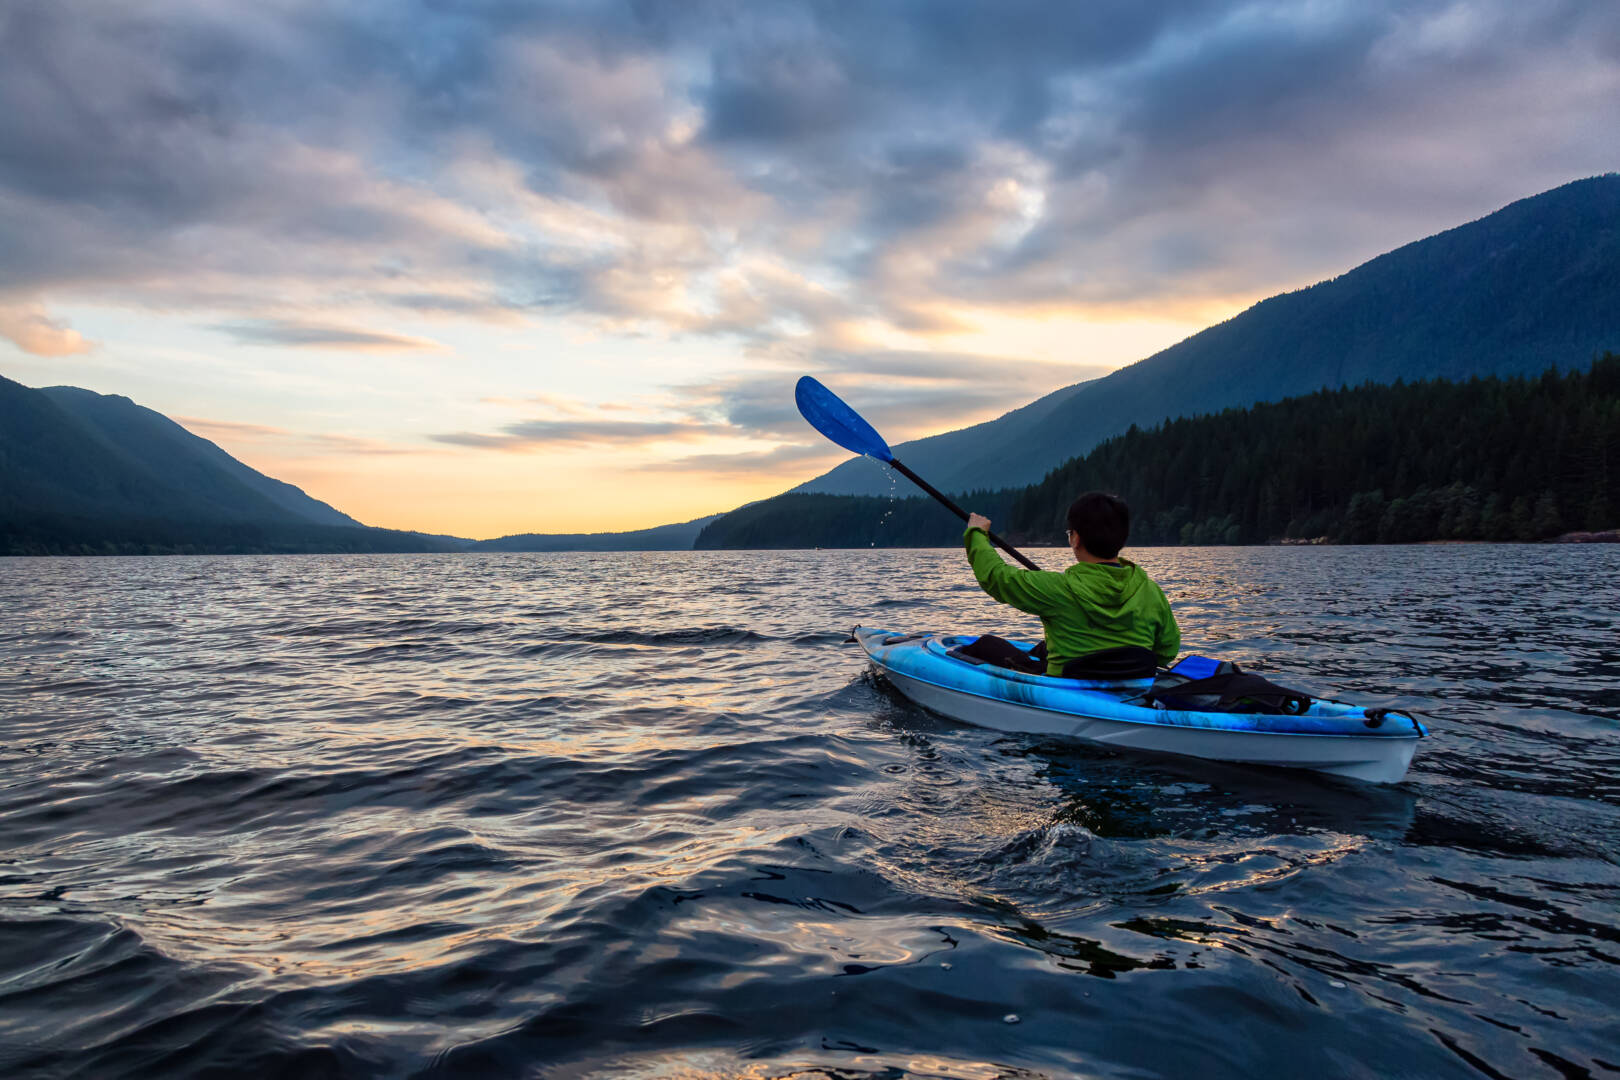 View of Person Kayaking on Scenic Lake at Sunset